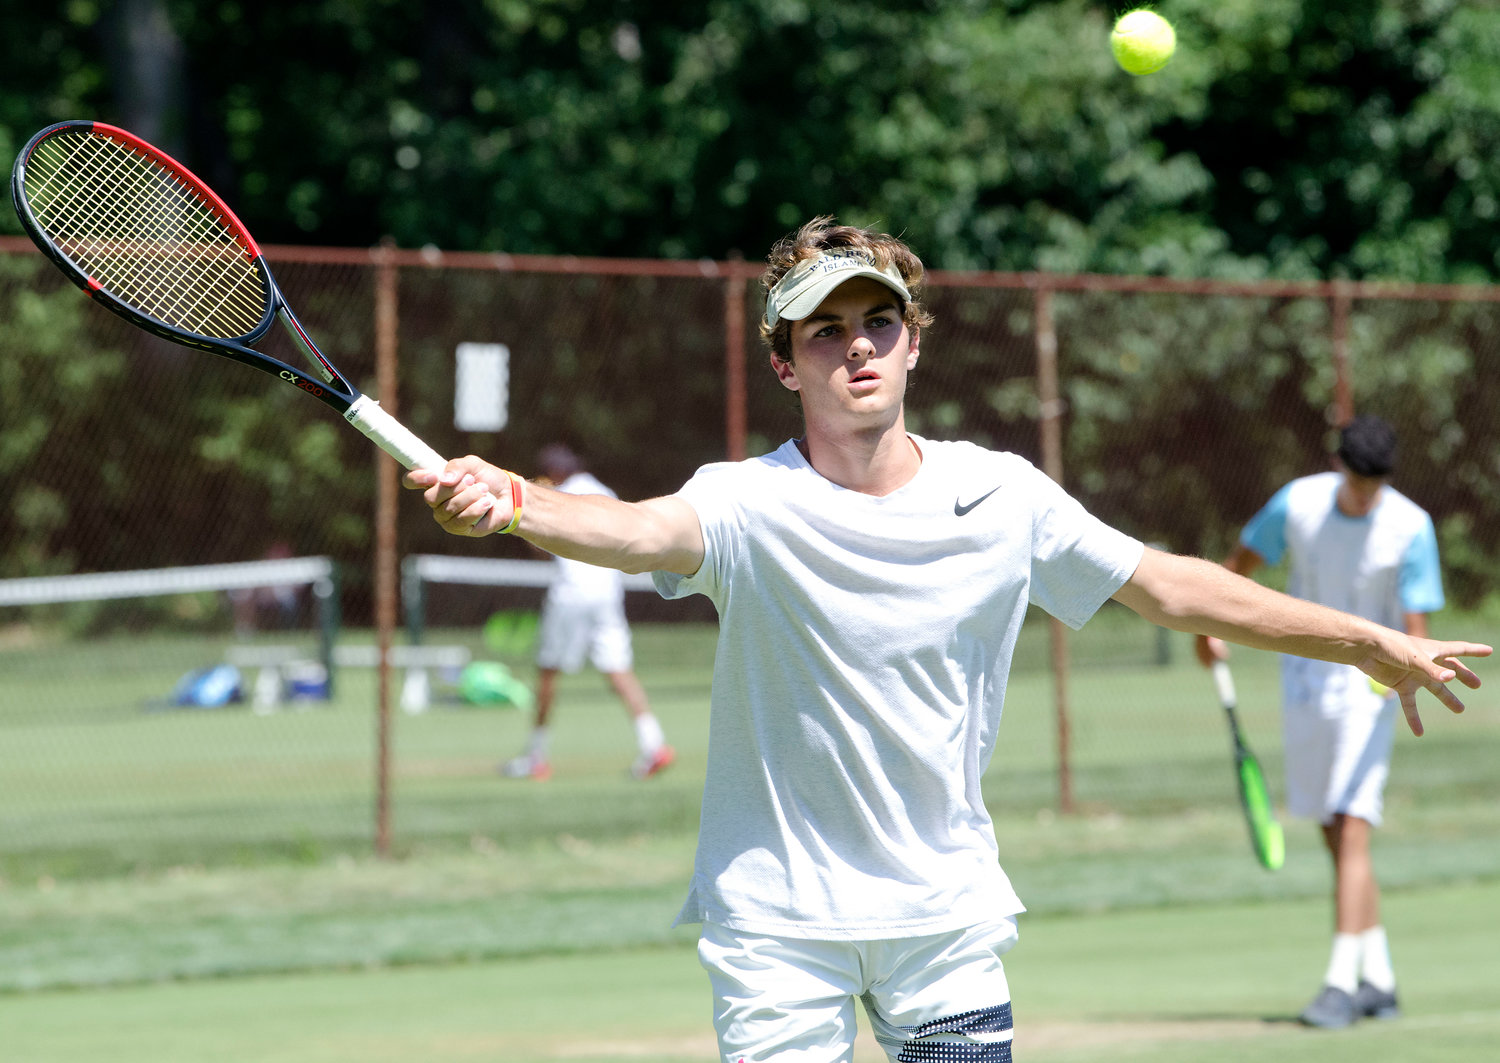 Alex Visser competes in singles at the Second Annual New England Grass Court Open Tourney.